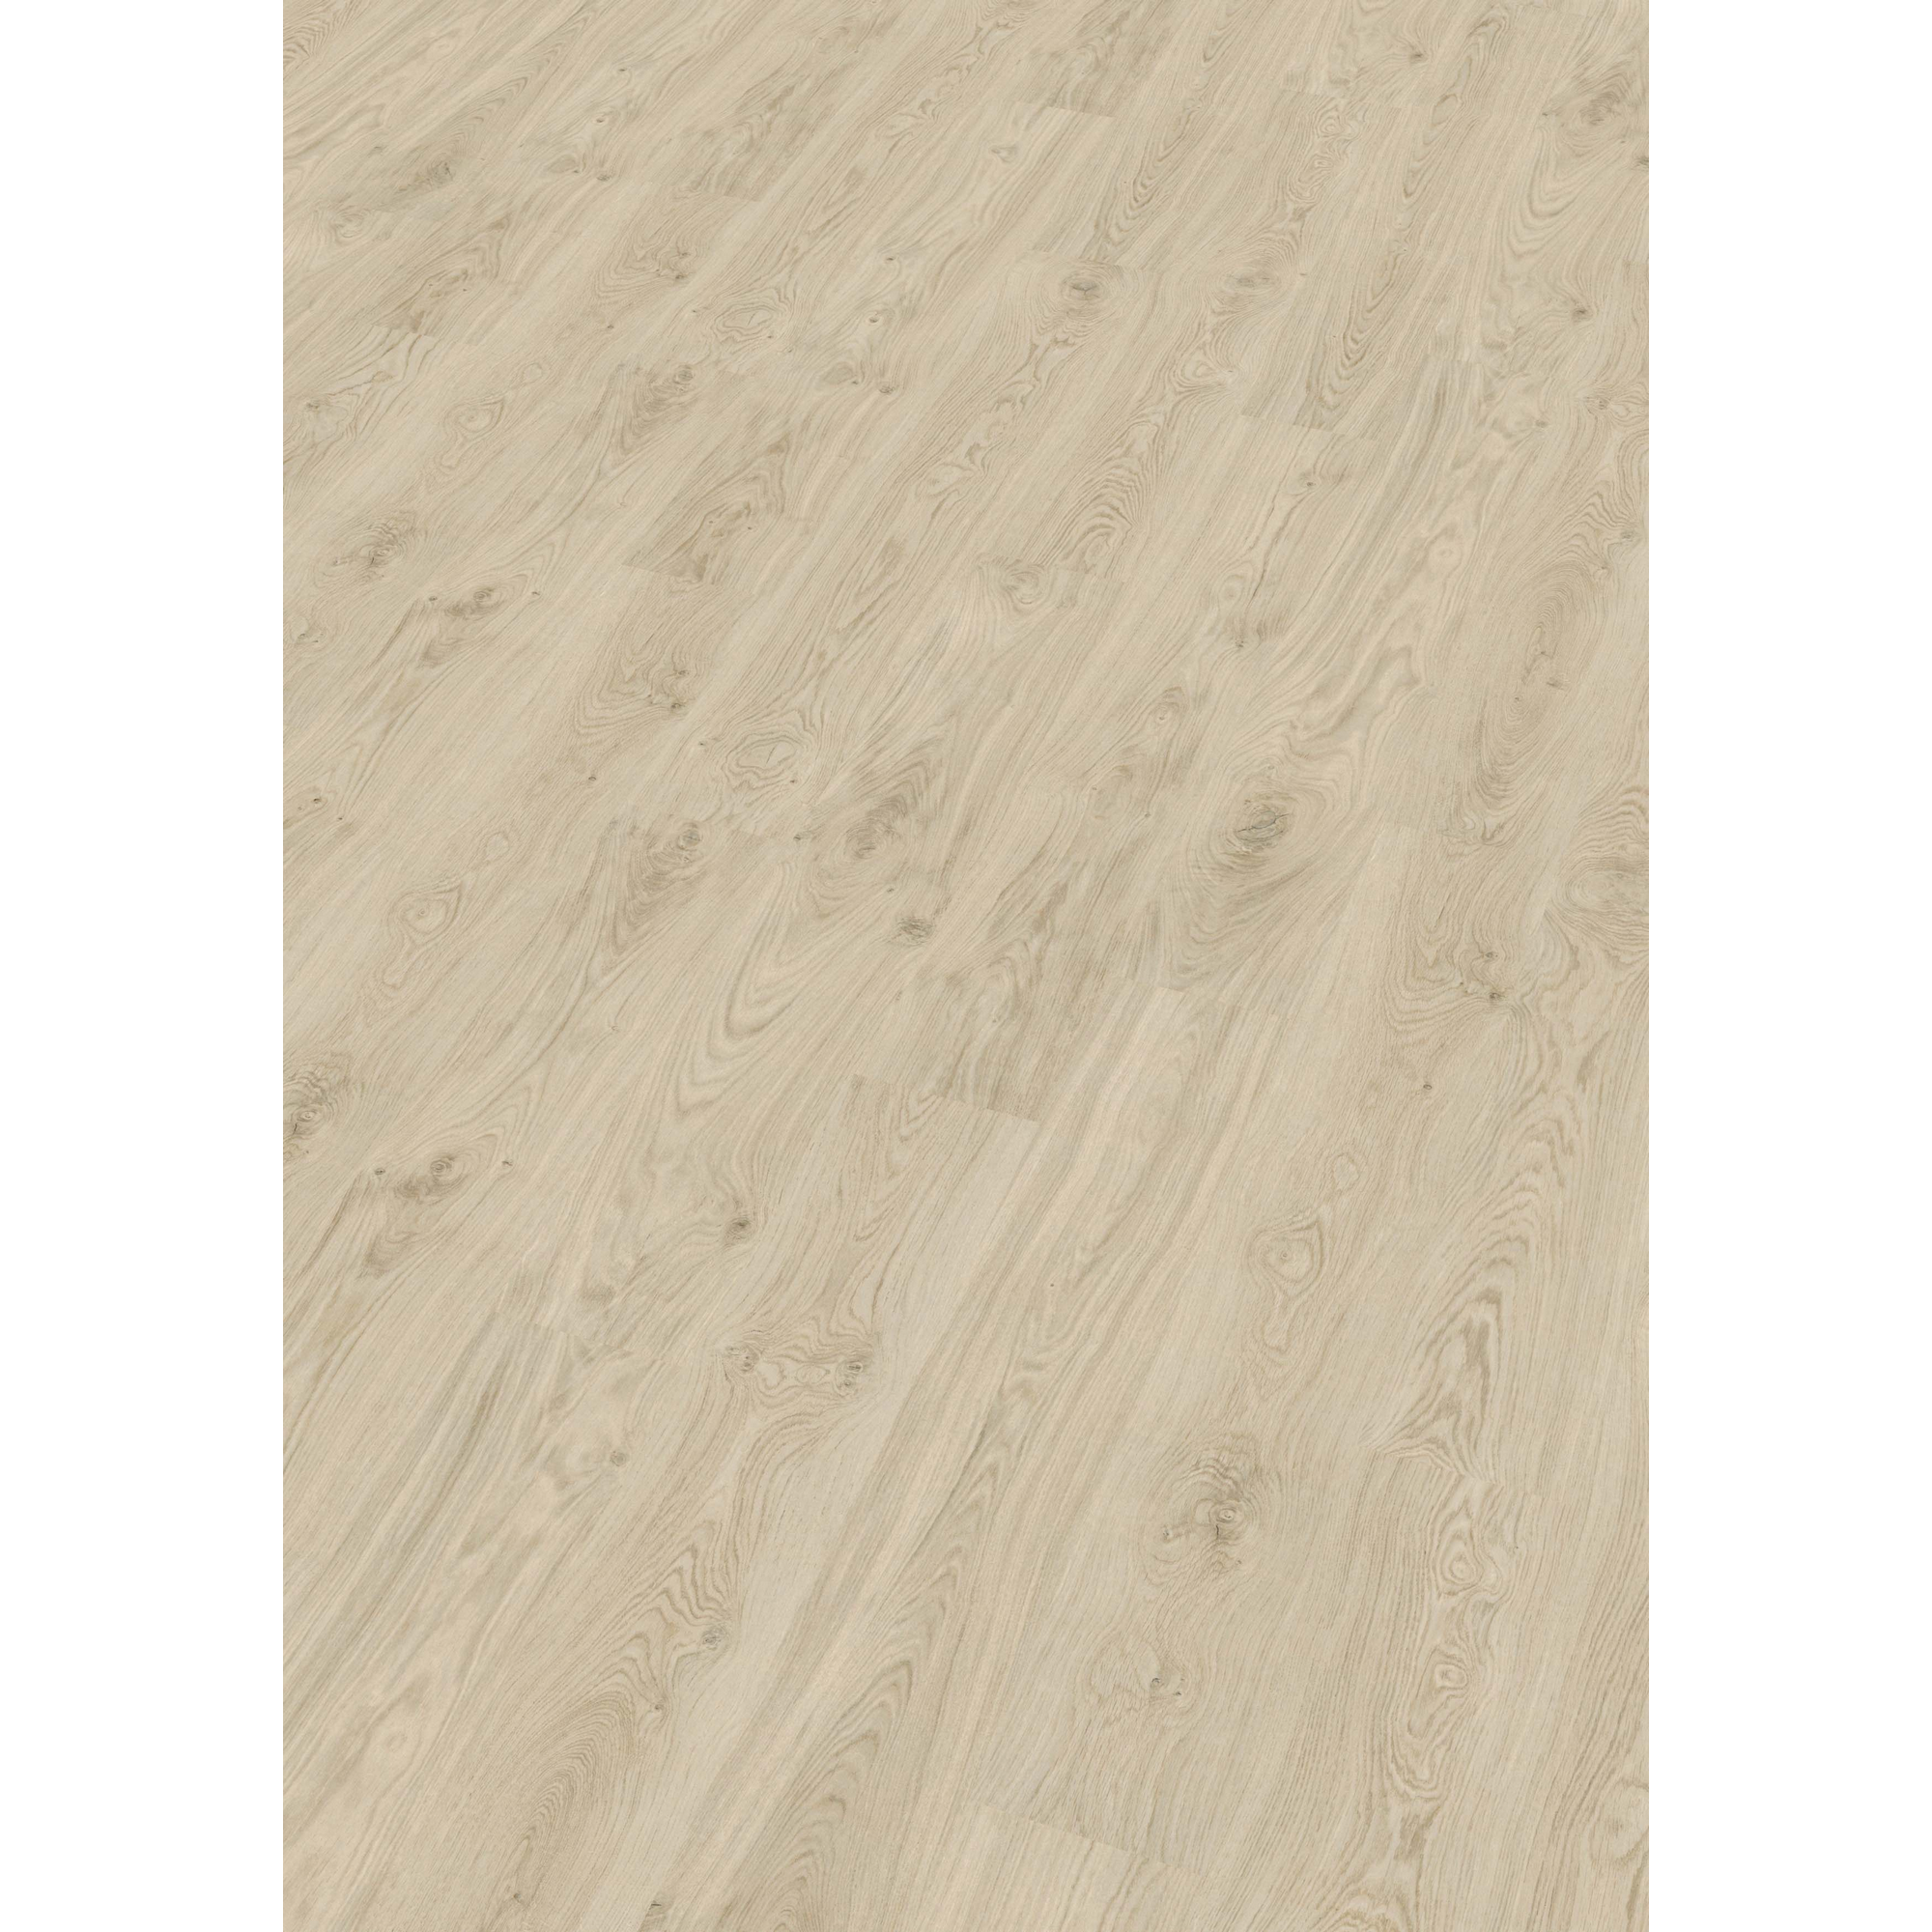 Vinylboden 'Freestyle Access' Oak Taupe braun 8,5 mm + product picture